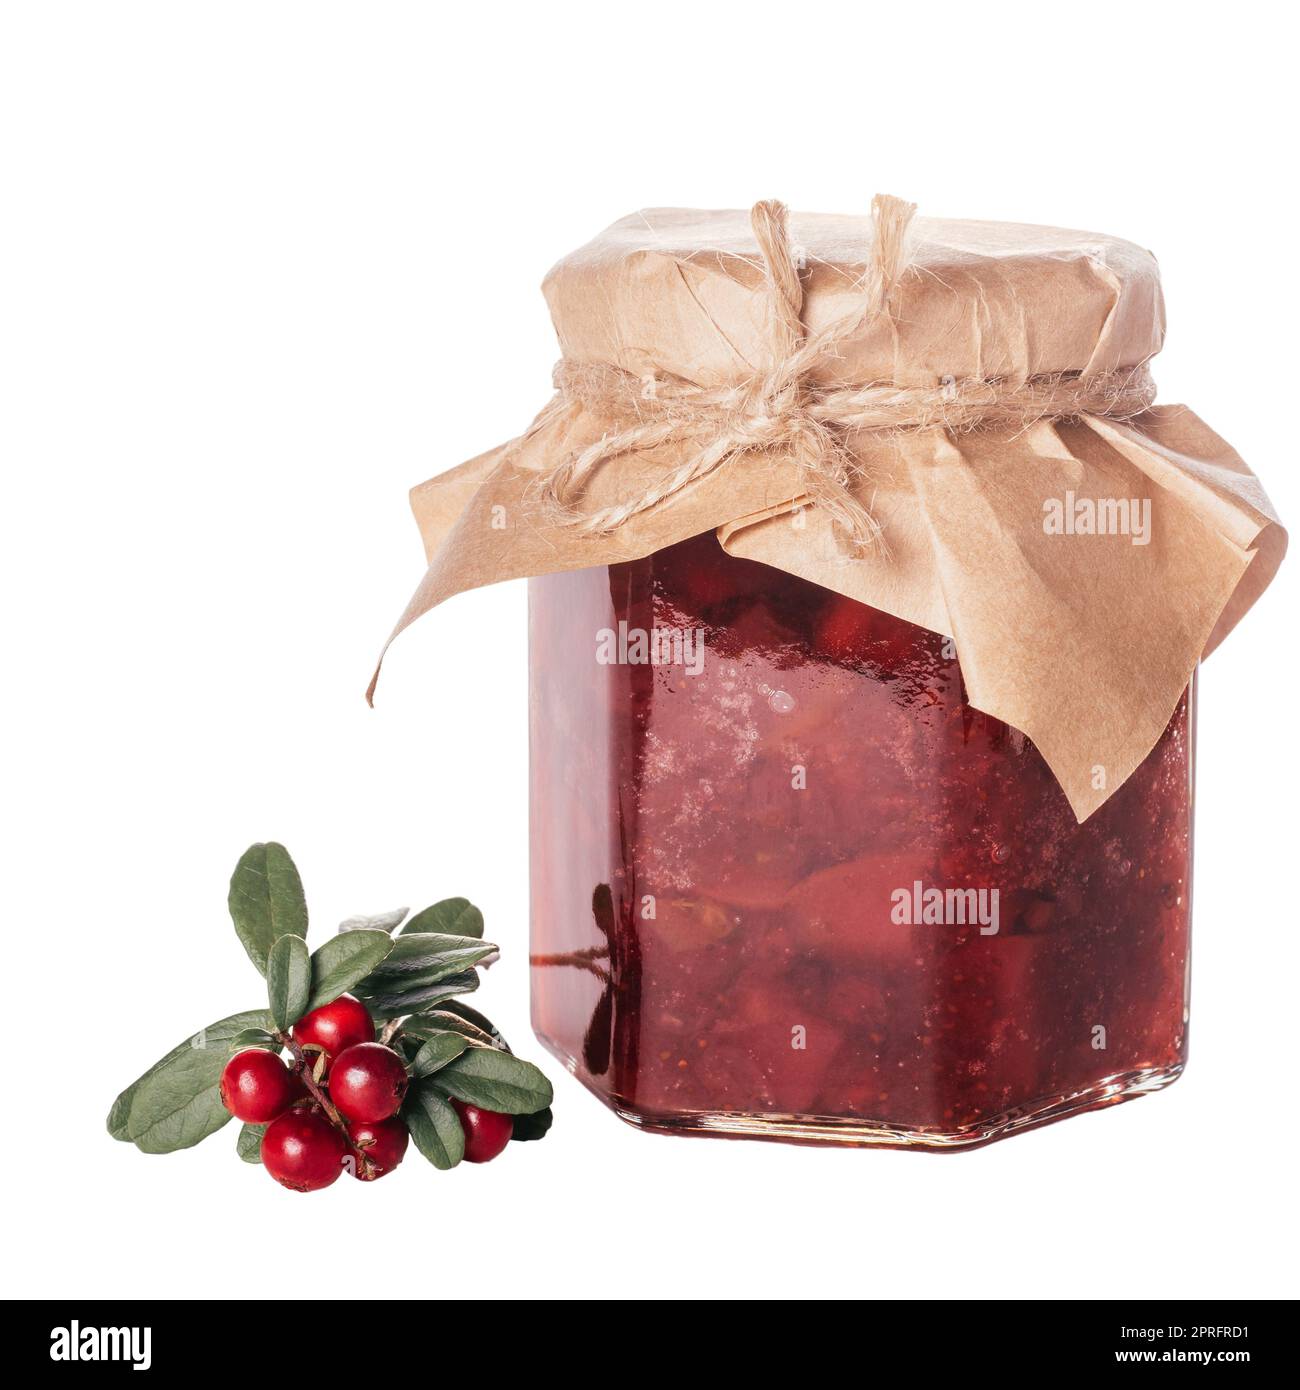 Jar of homemade lingonberry and pear jam with craft paper on lid next to fresh lingonberries isolated on white background. Autumn homemade preparation Stock Photo